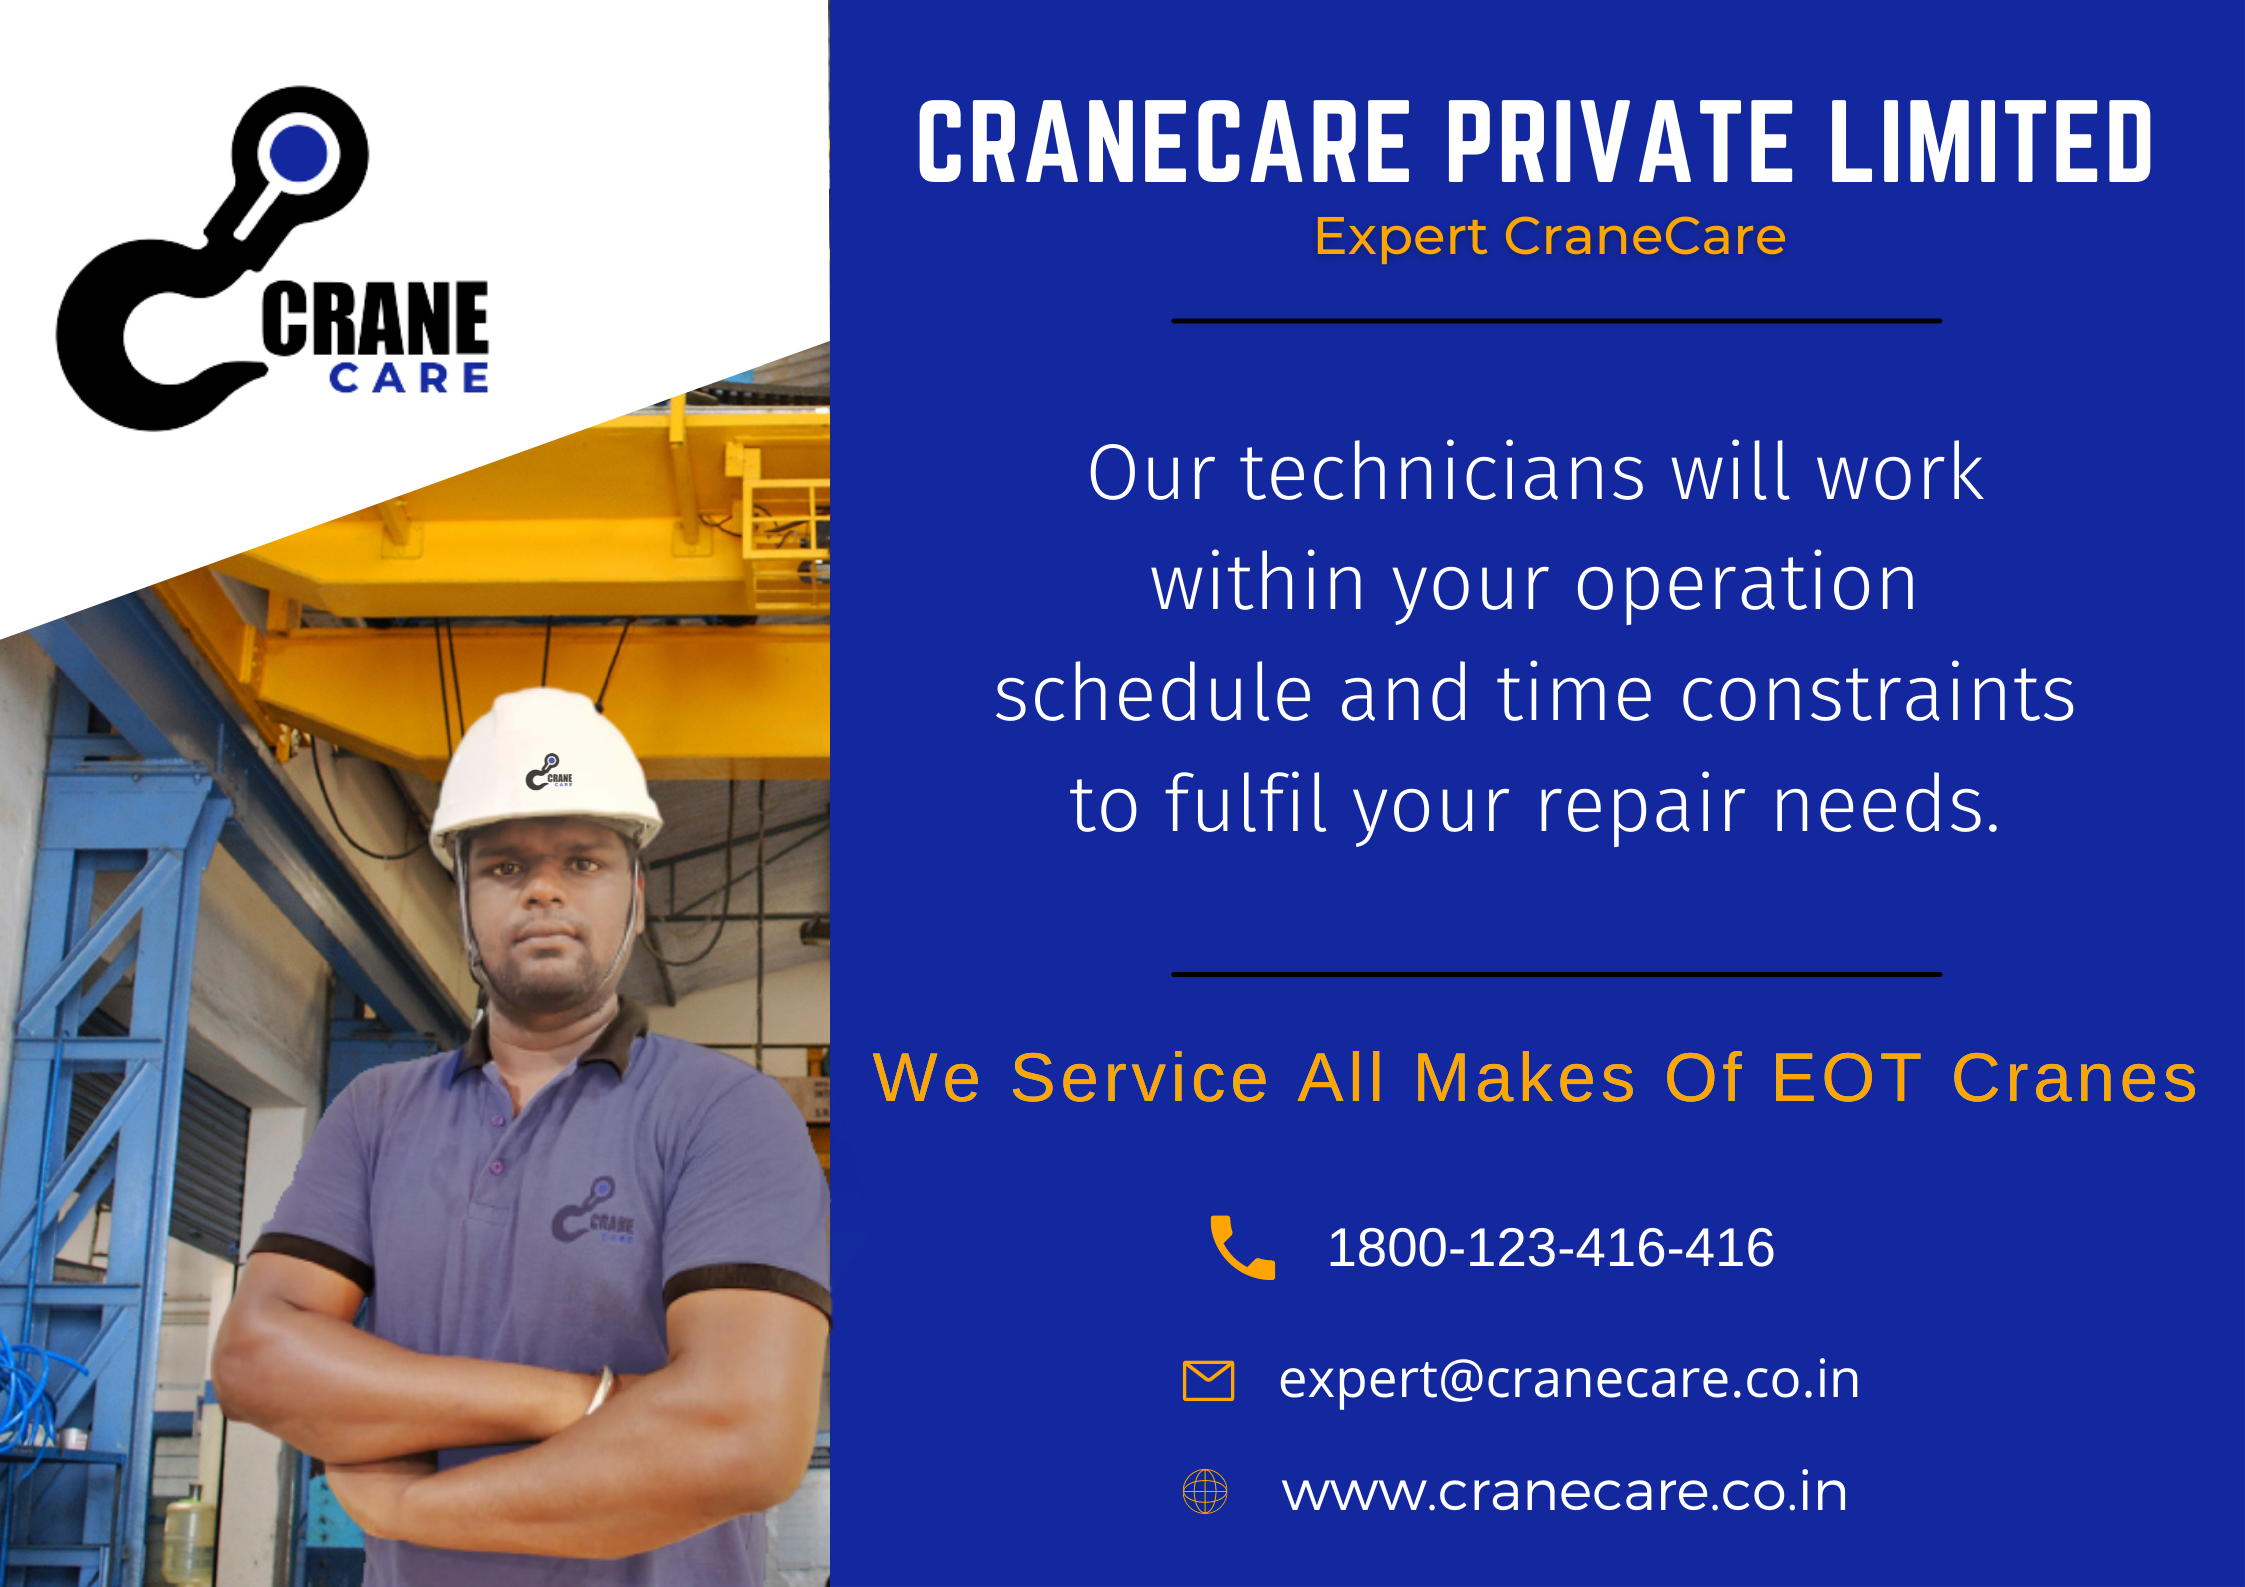 Our Technicians Will Work Within Your